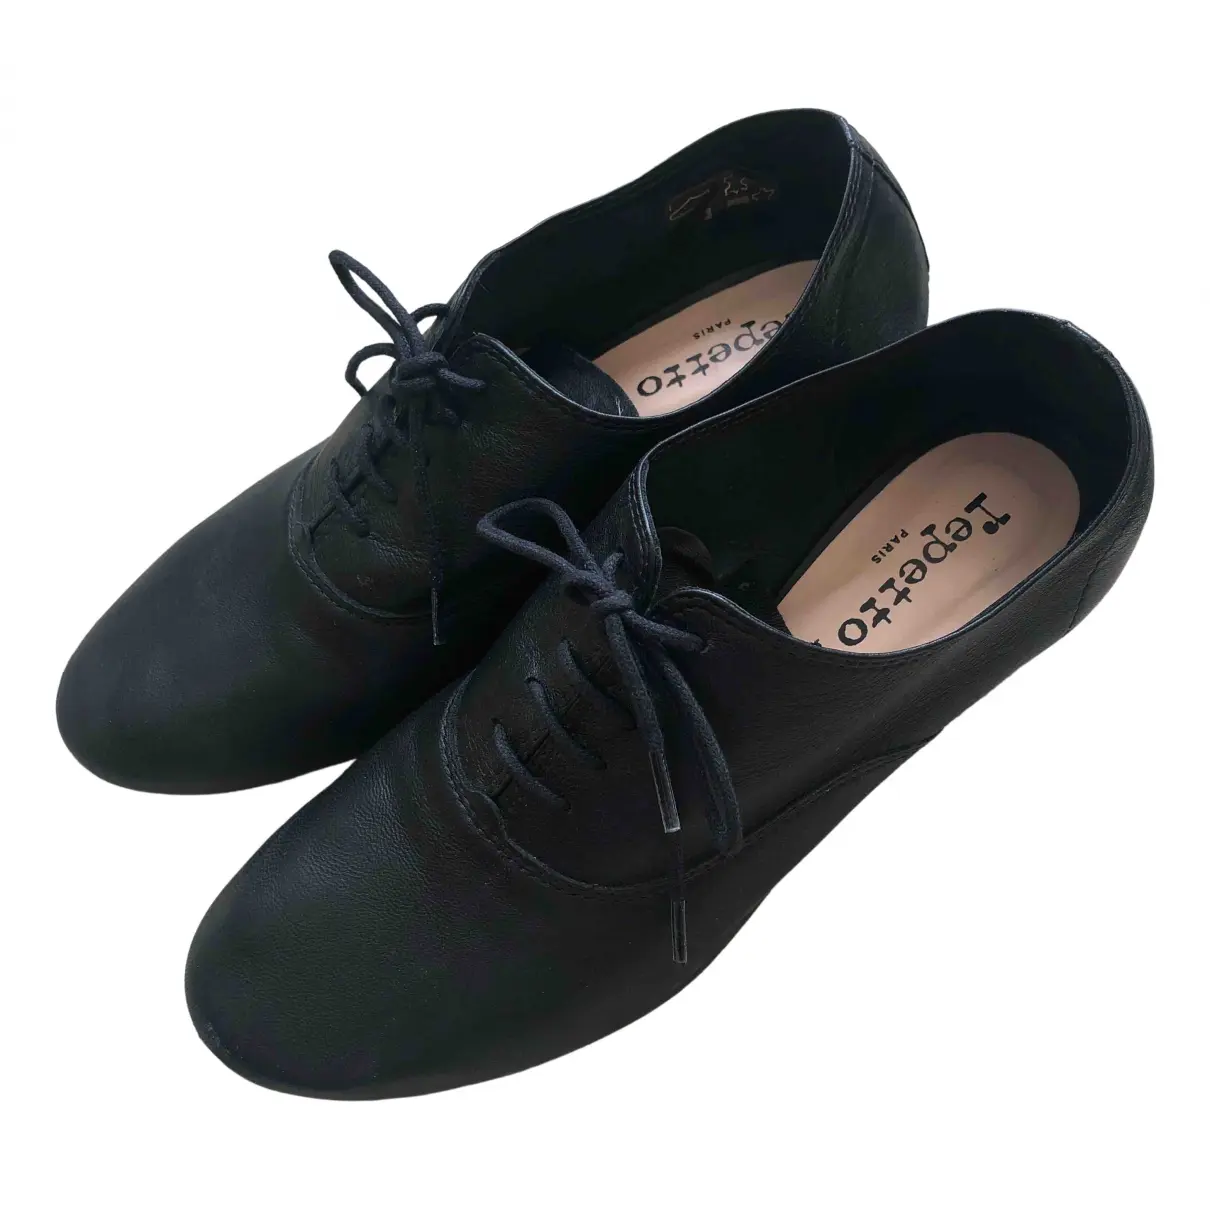 Leather lace ups Repetto